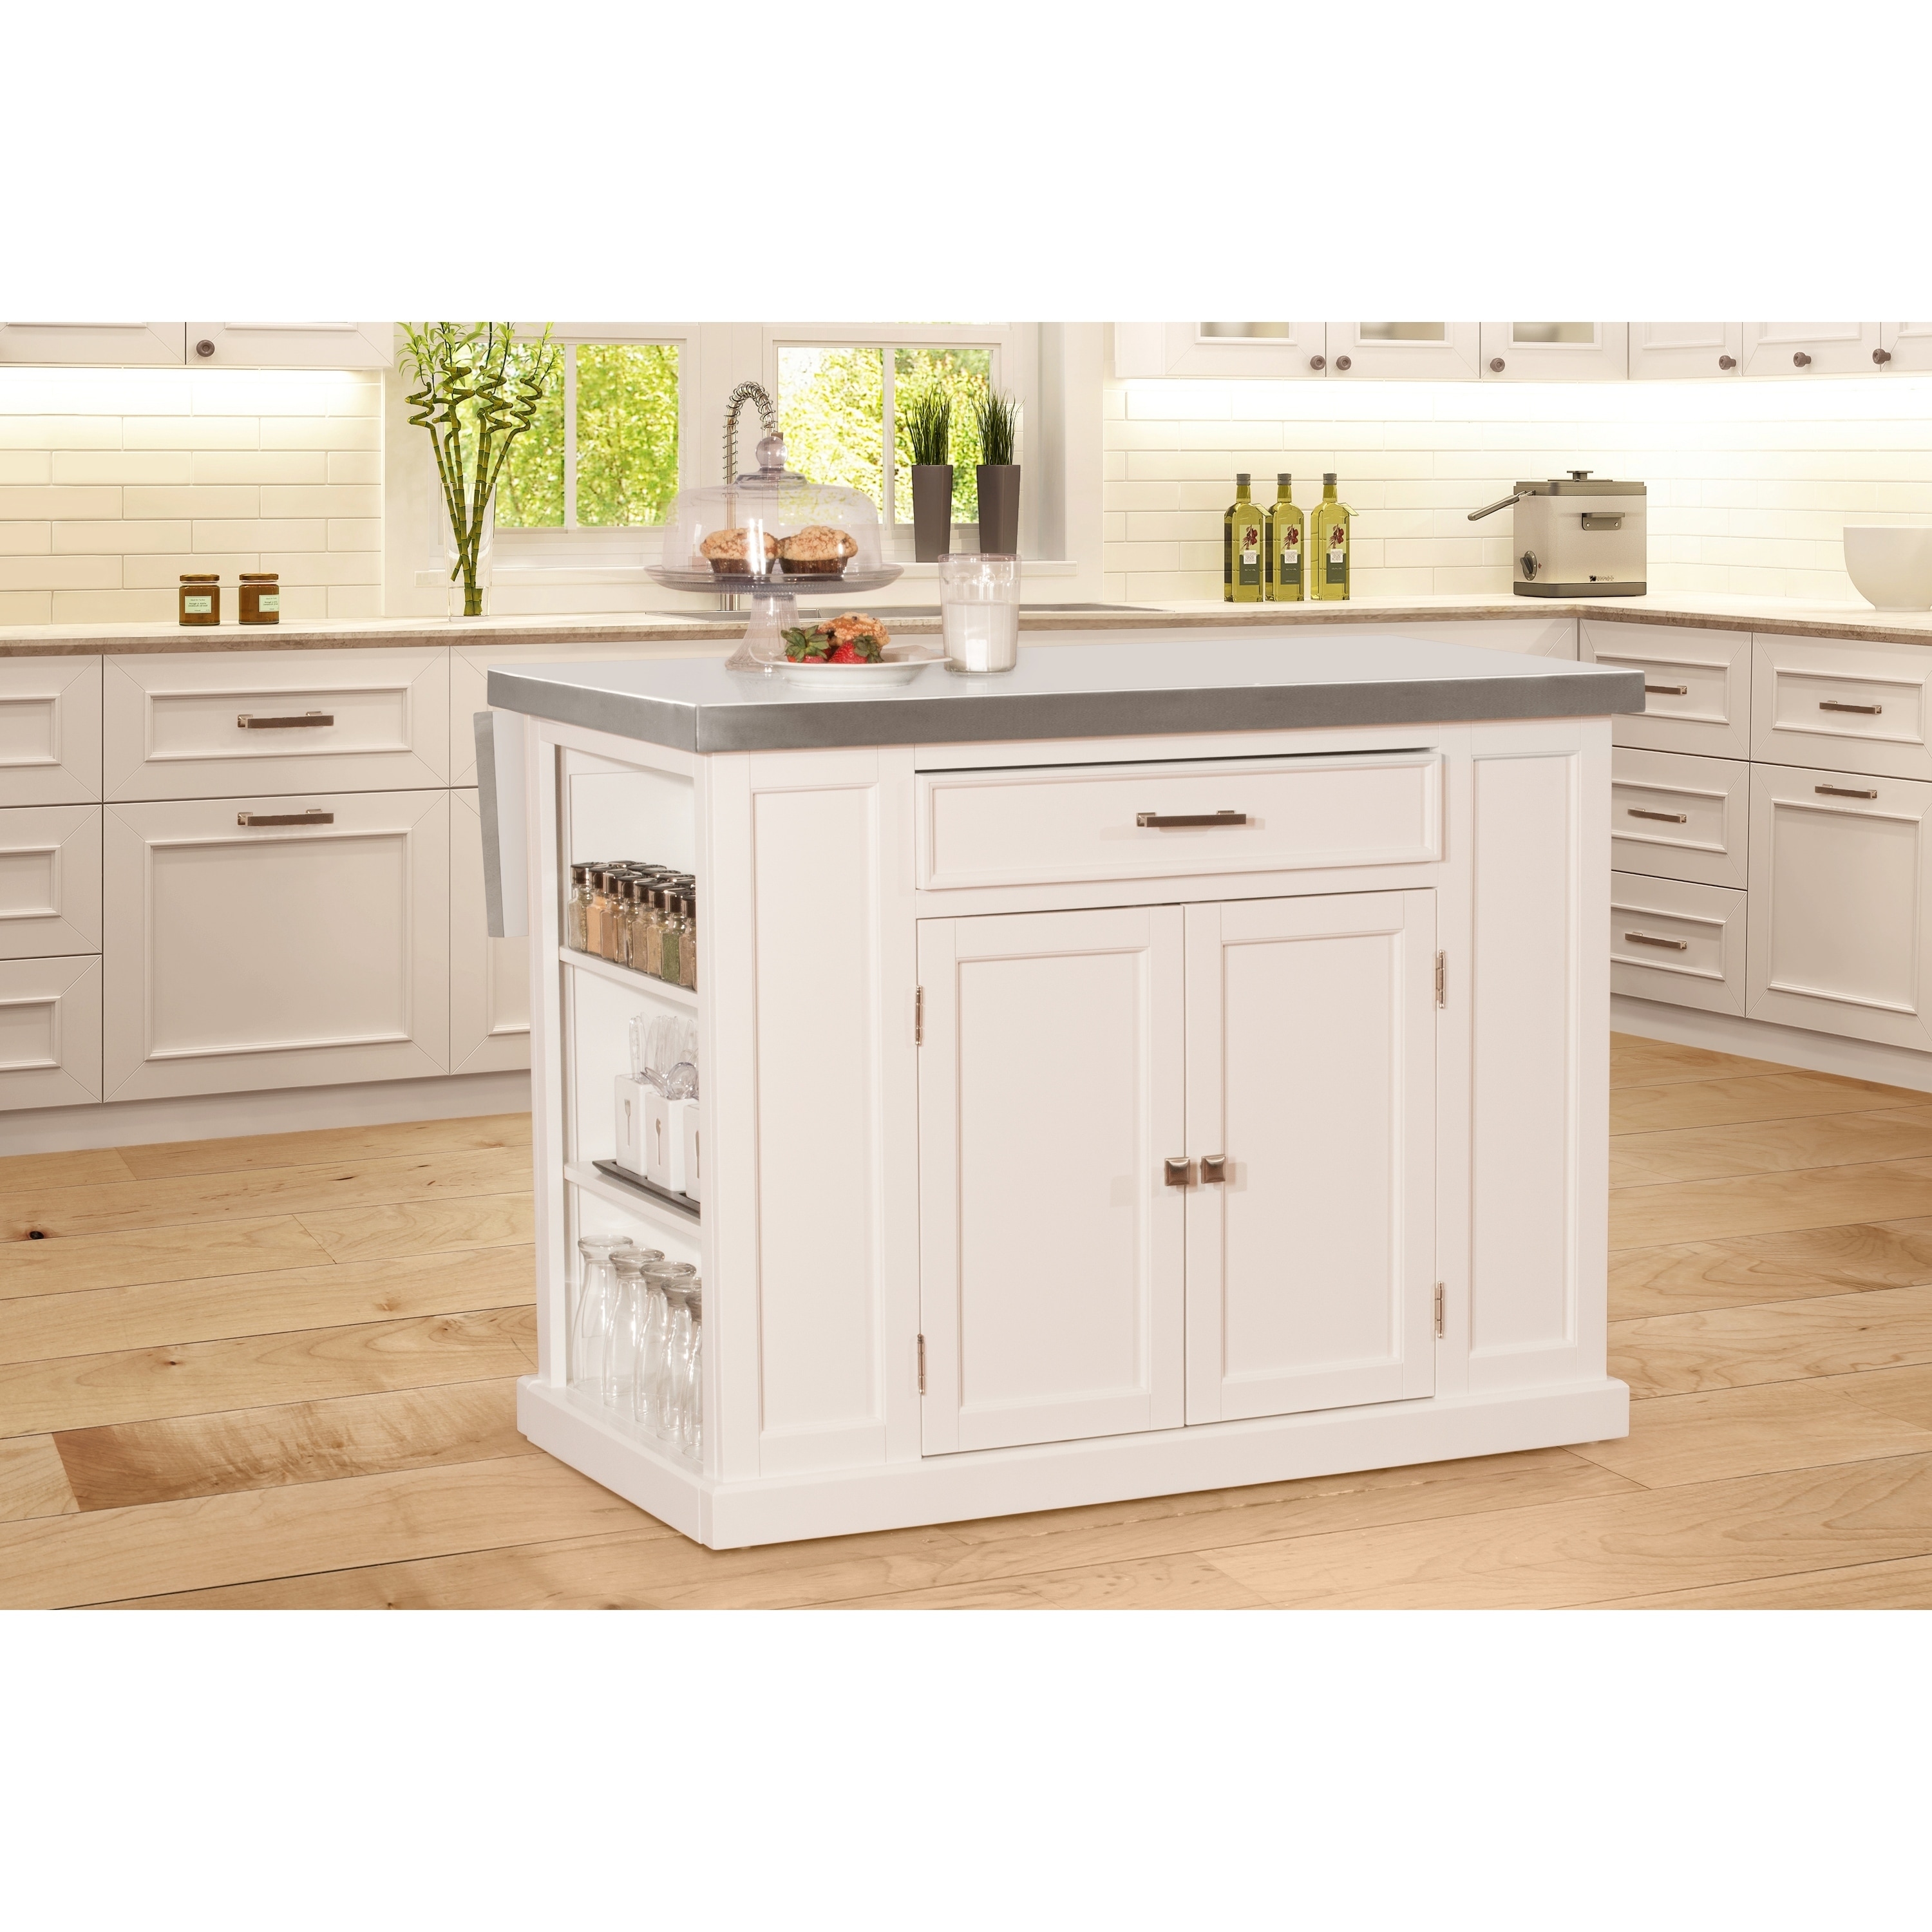 Flemington Kitchen Island In White With Stainless Steel Top By